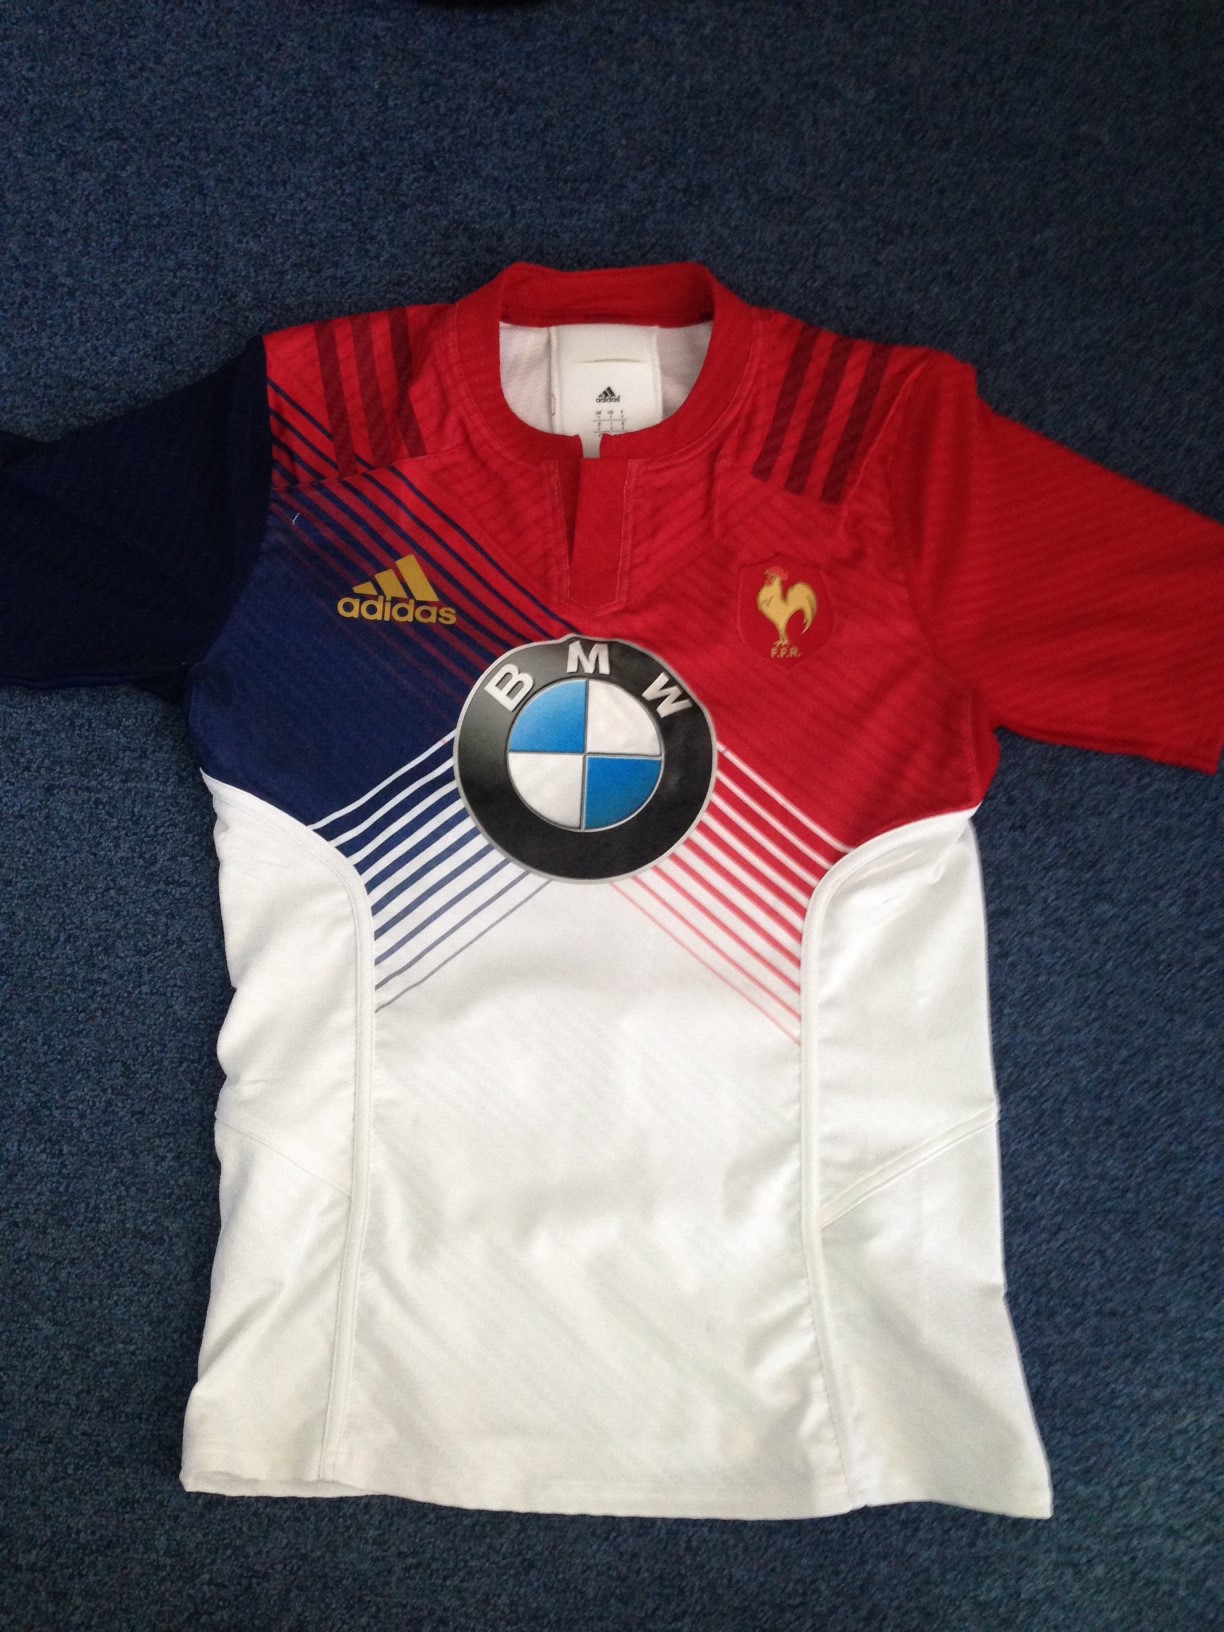 maillot-equipe-de-france-rugby-20-ans-bmw-sponsor-maillot